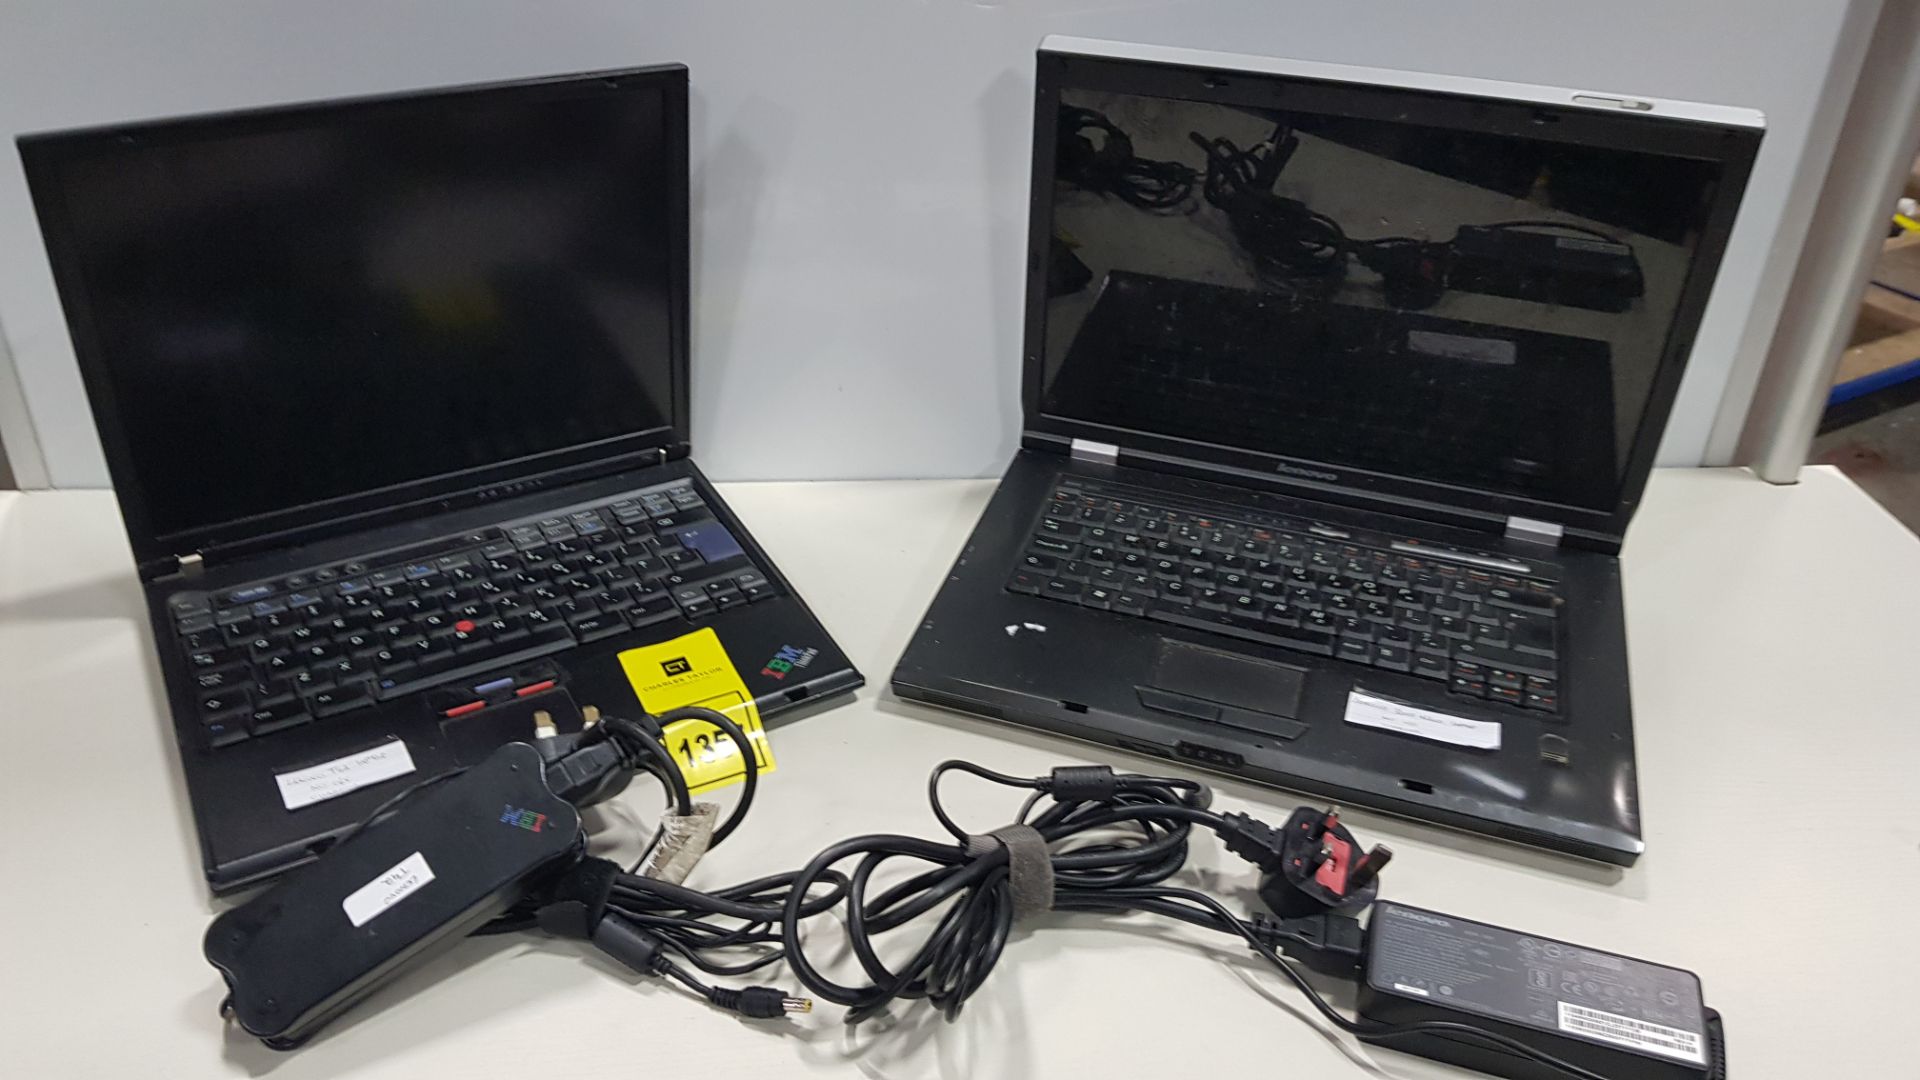 2 LAPTOPS INCLUDING LENOVO T42 AND LENOVO 3000 WITH CHARGERS AND NO O/S